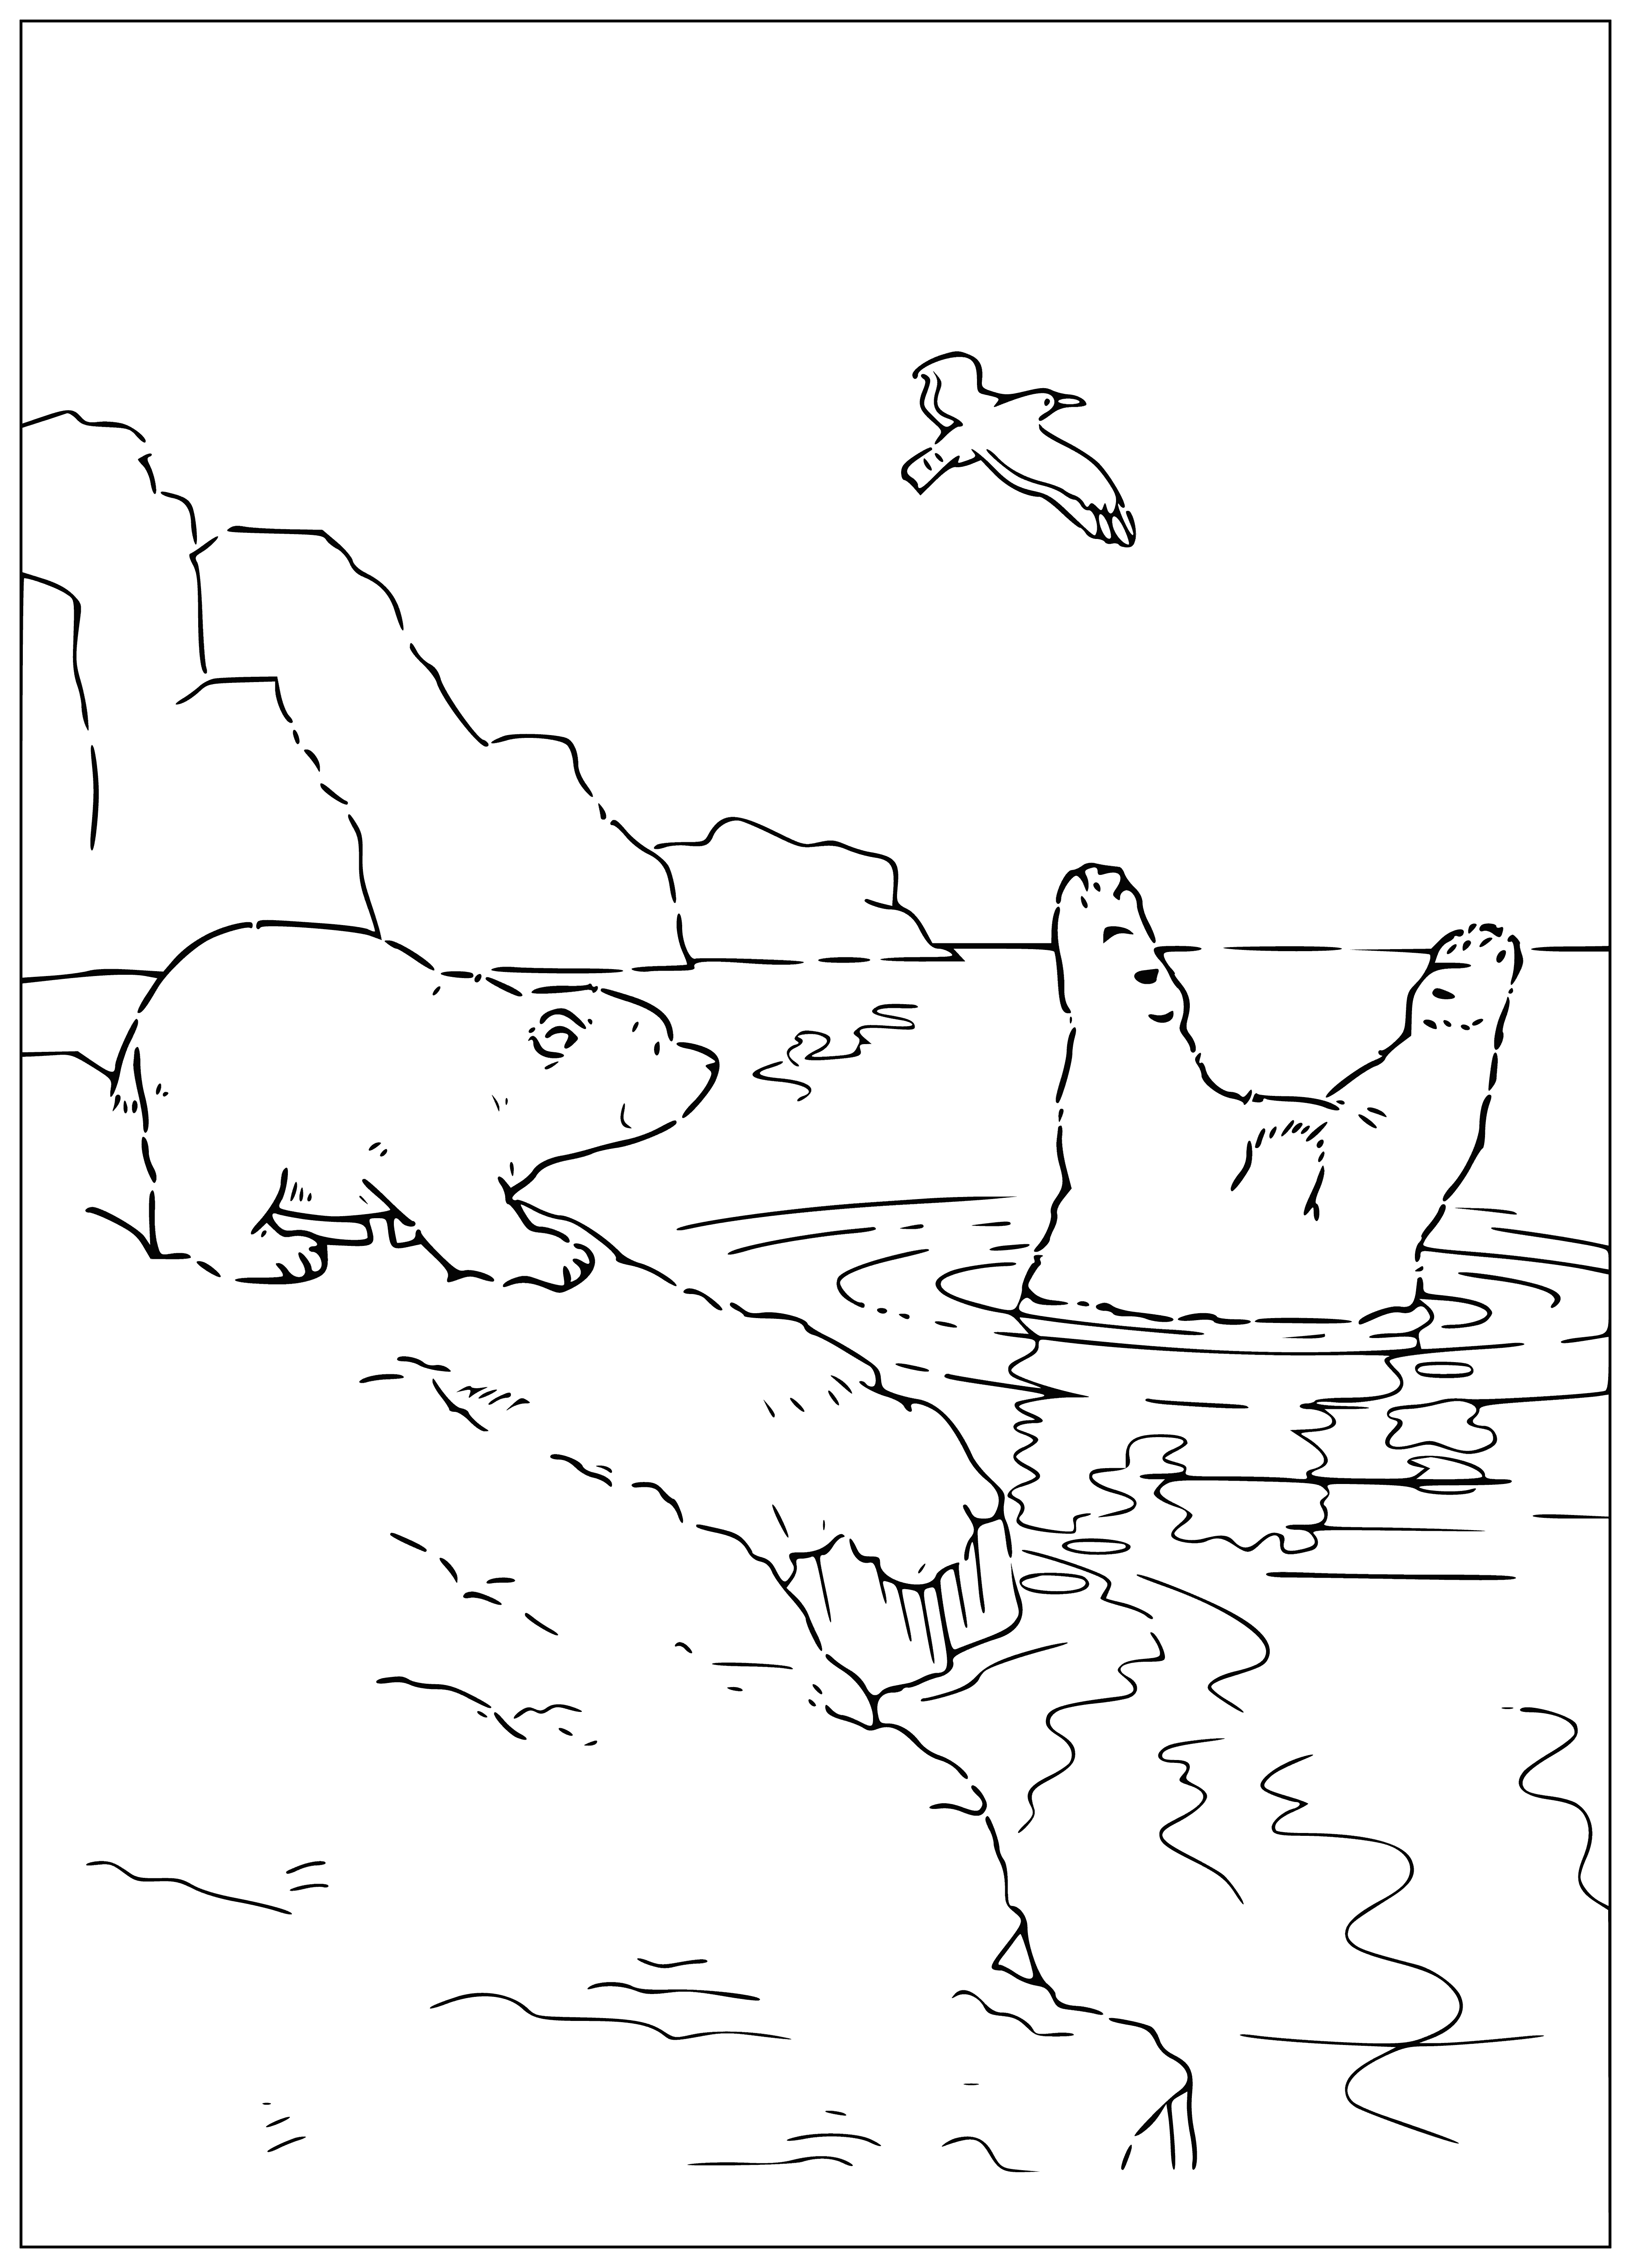 coloring page: Small polar bear cub takes a bath, splashing and enjoying the refreshing water with fur matted and face turned up to sky.